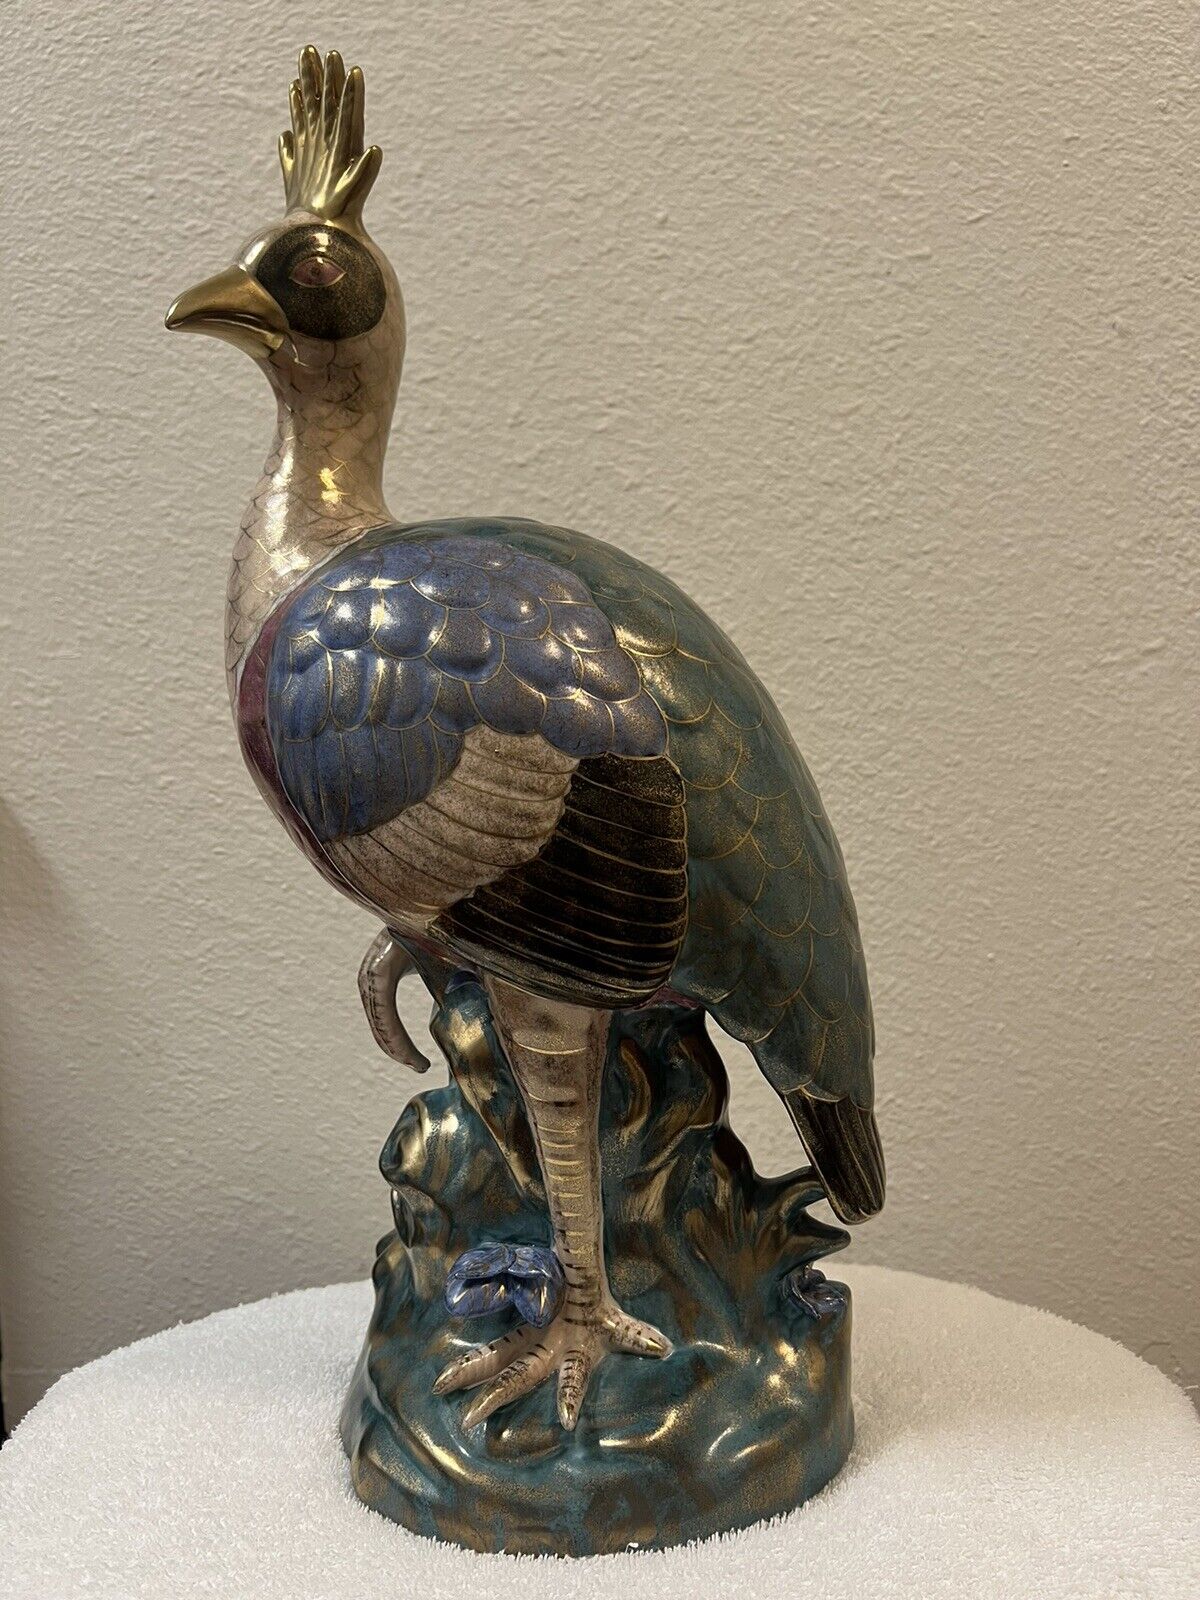 Porcelain Figurine Peacock By Under Strict Supervision By H.F.P MACAU